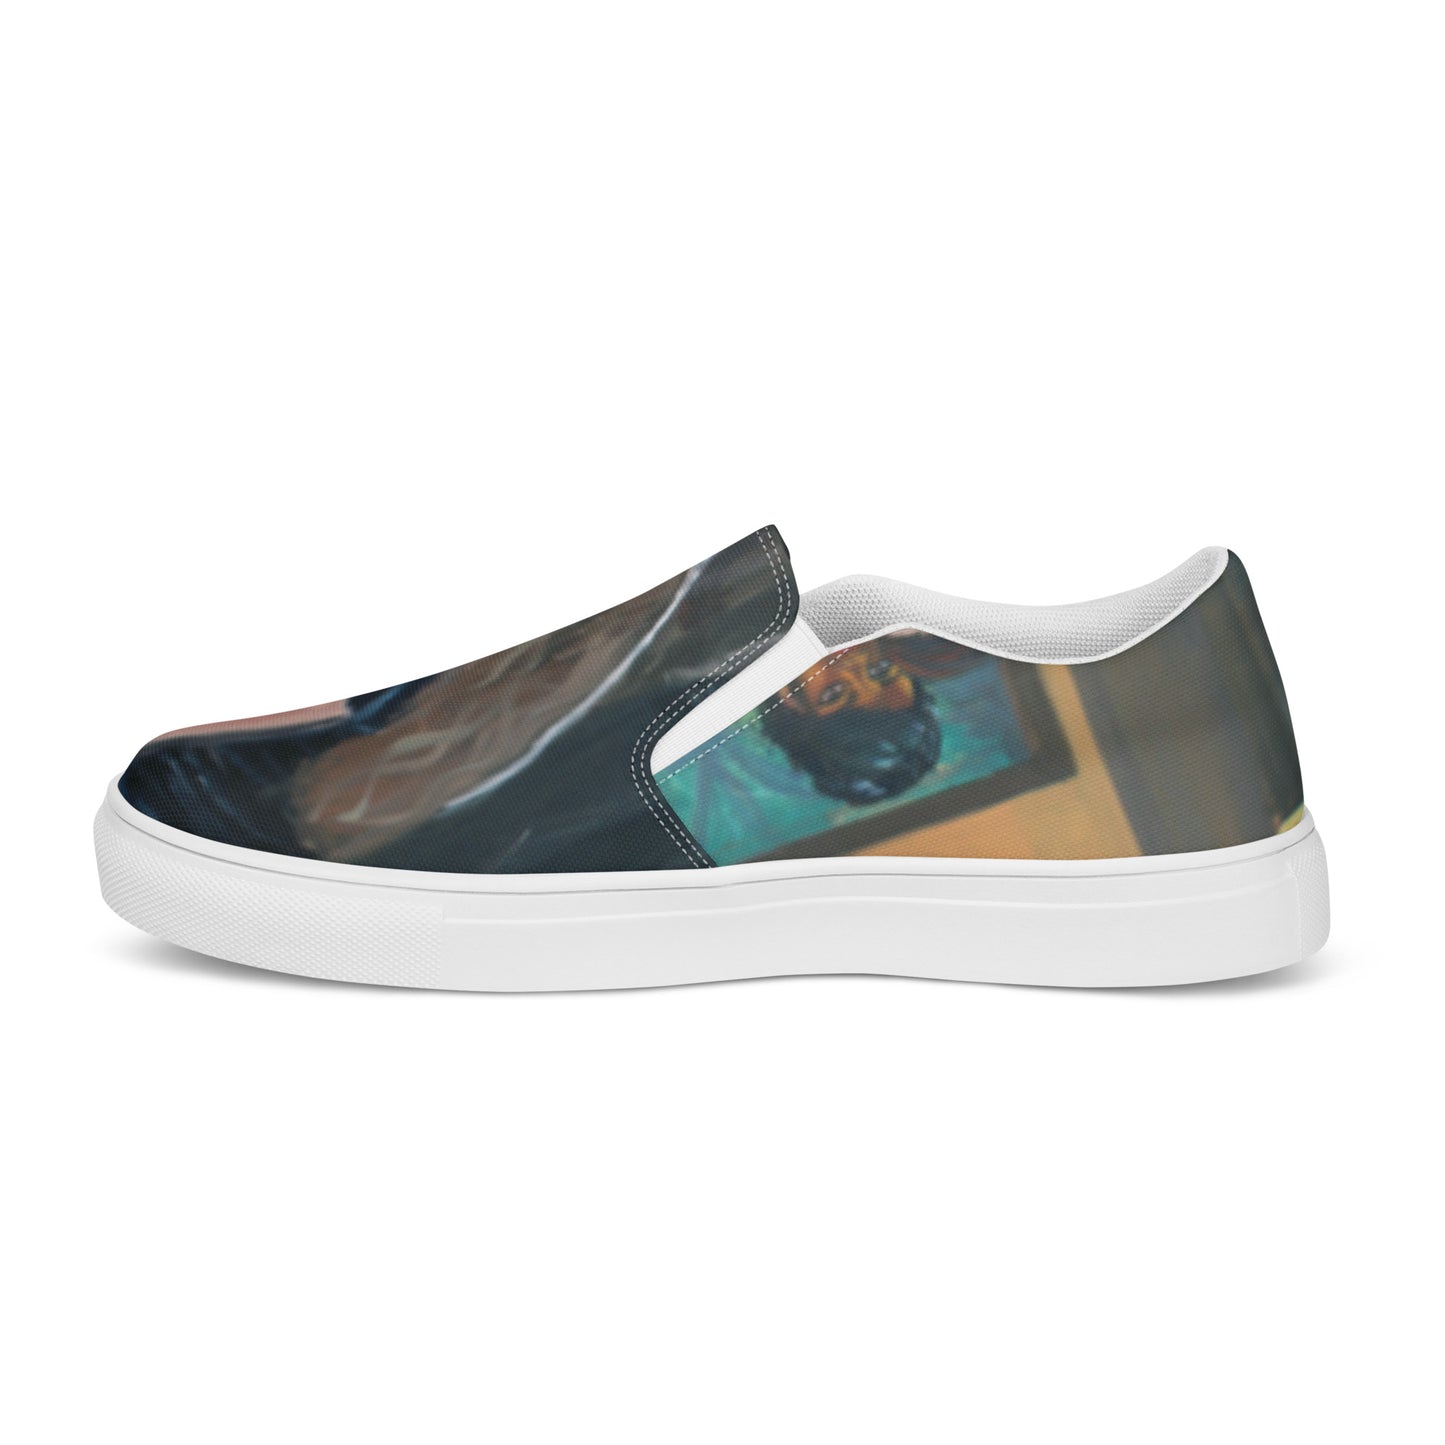 Friday Night - Men’s slip-on canvas shoes